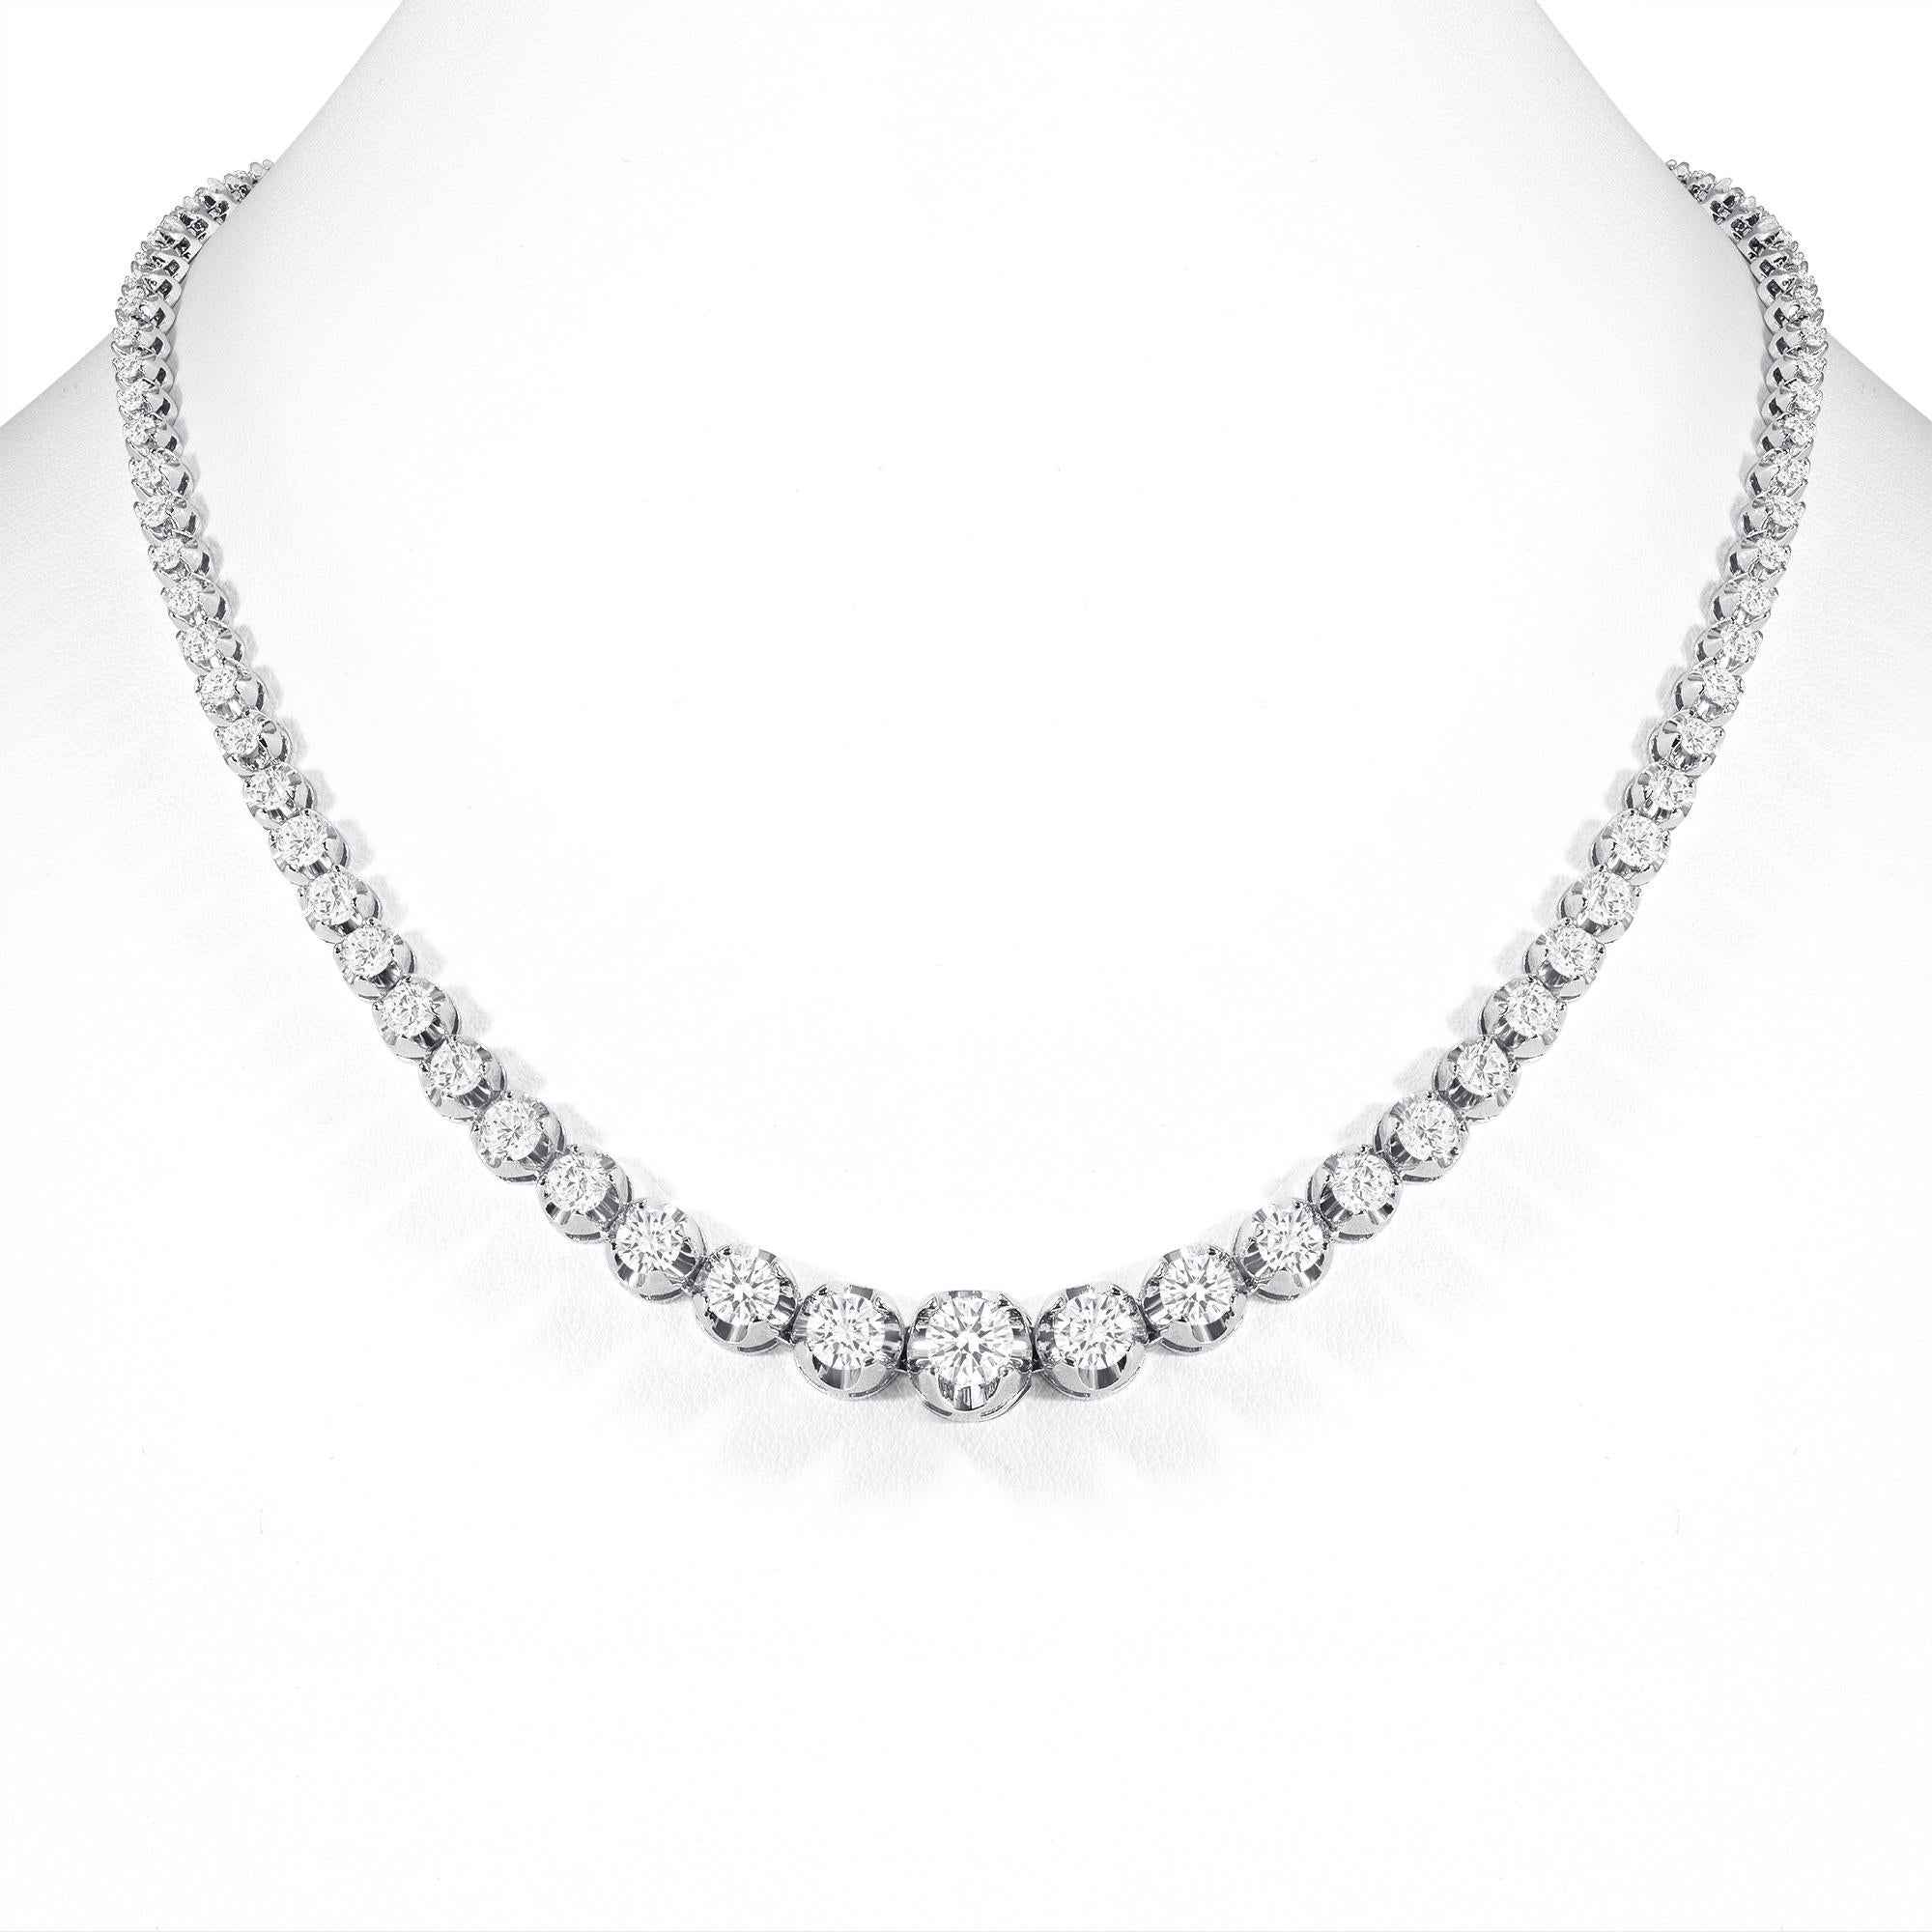 This finely made graduated necklace with beautiful round diamonds sits elegantly on any neck. 

Metal: 14k Gold
Diamond Cut: Round
Total Diamond Approx. Carats:  5ct
Diamond Clarity: VS
Diamond Color: F-G
Size: 20 inches
Color: White Gold
Included